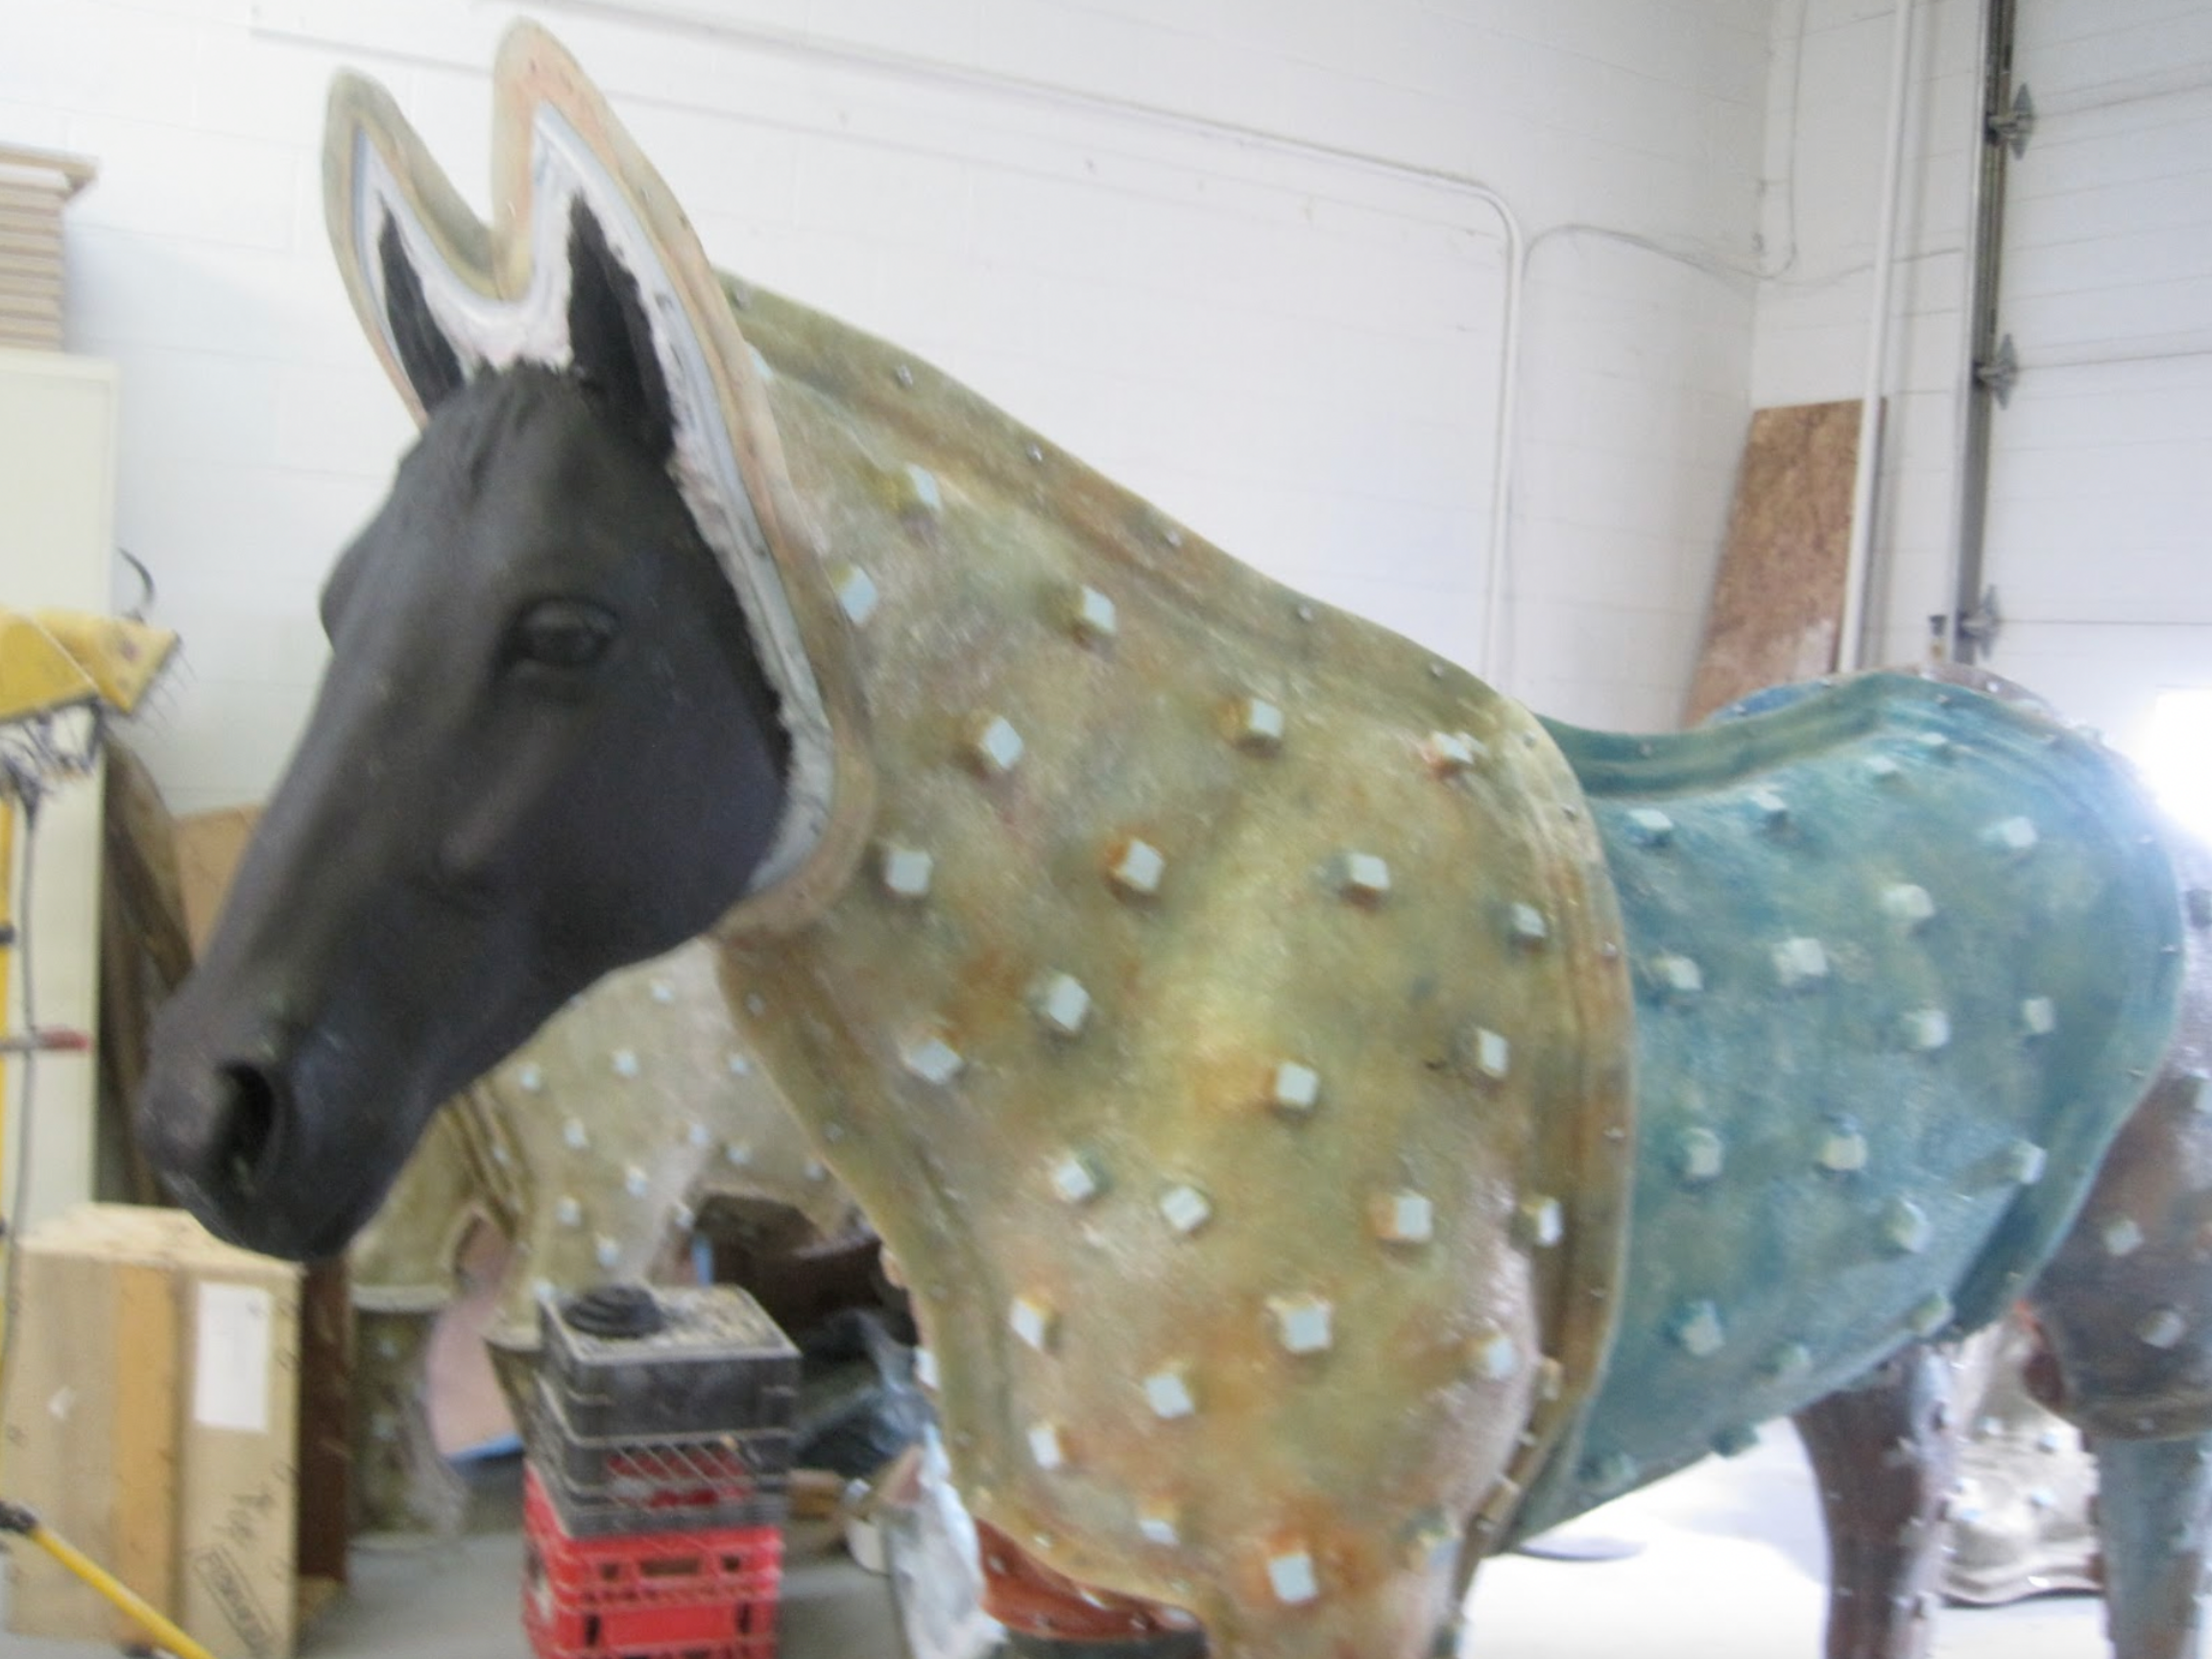  The Quarter Horse mold has been completed and the first fiberglass model begins to emerge from it. &nbsp;Once complete all the internals will be added (cecum, right and left ventral colon, right and left dorsal colon,section of small intestine, left